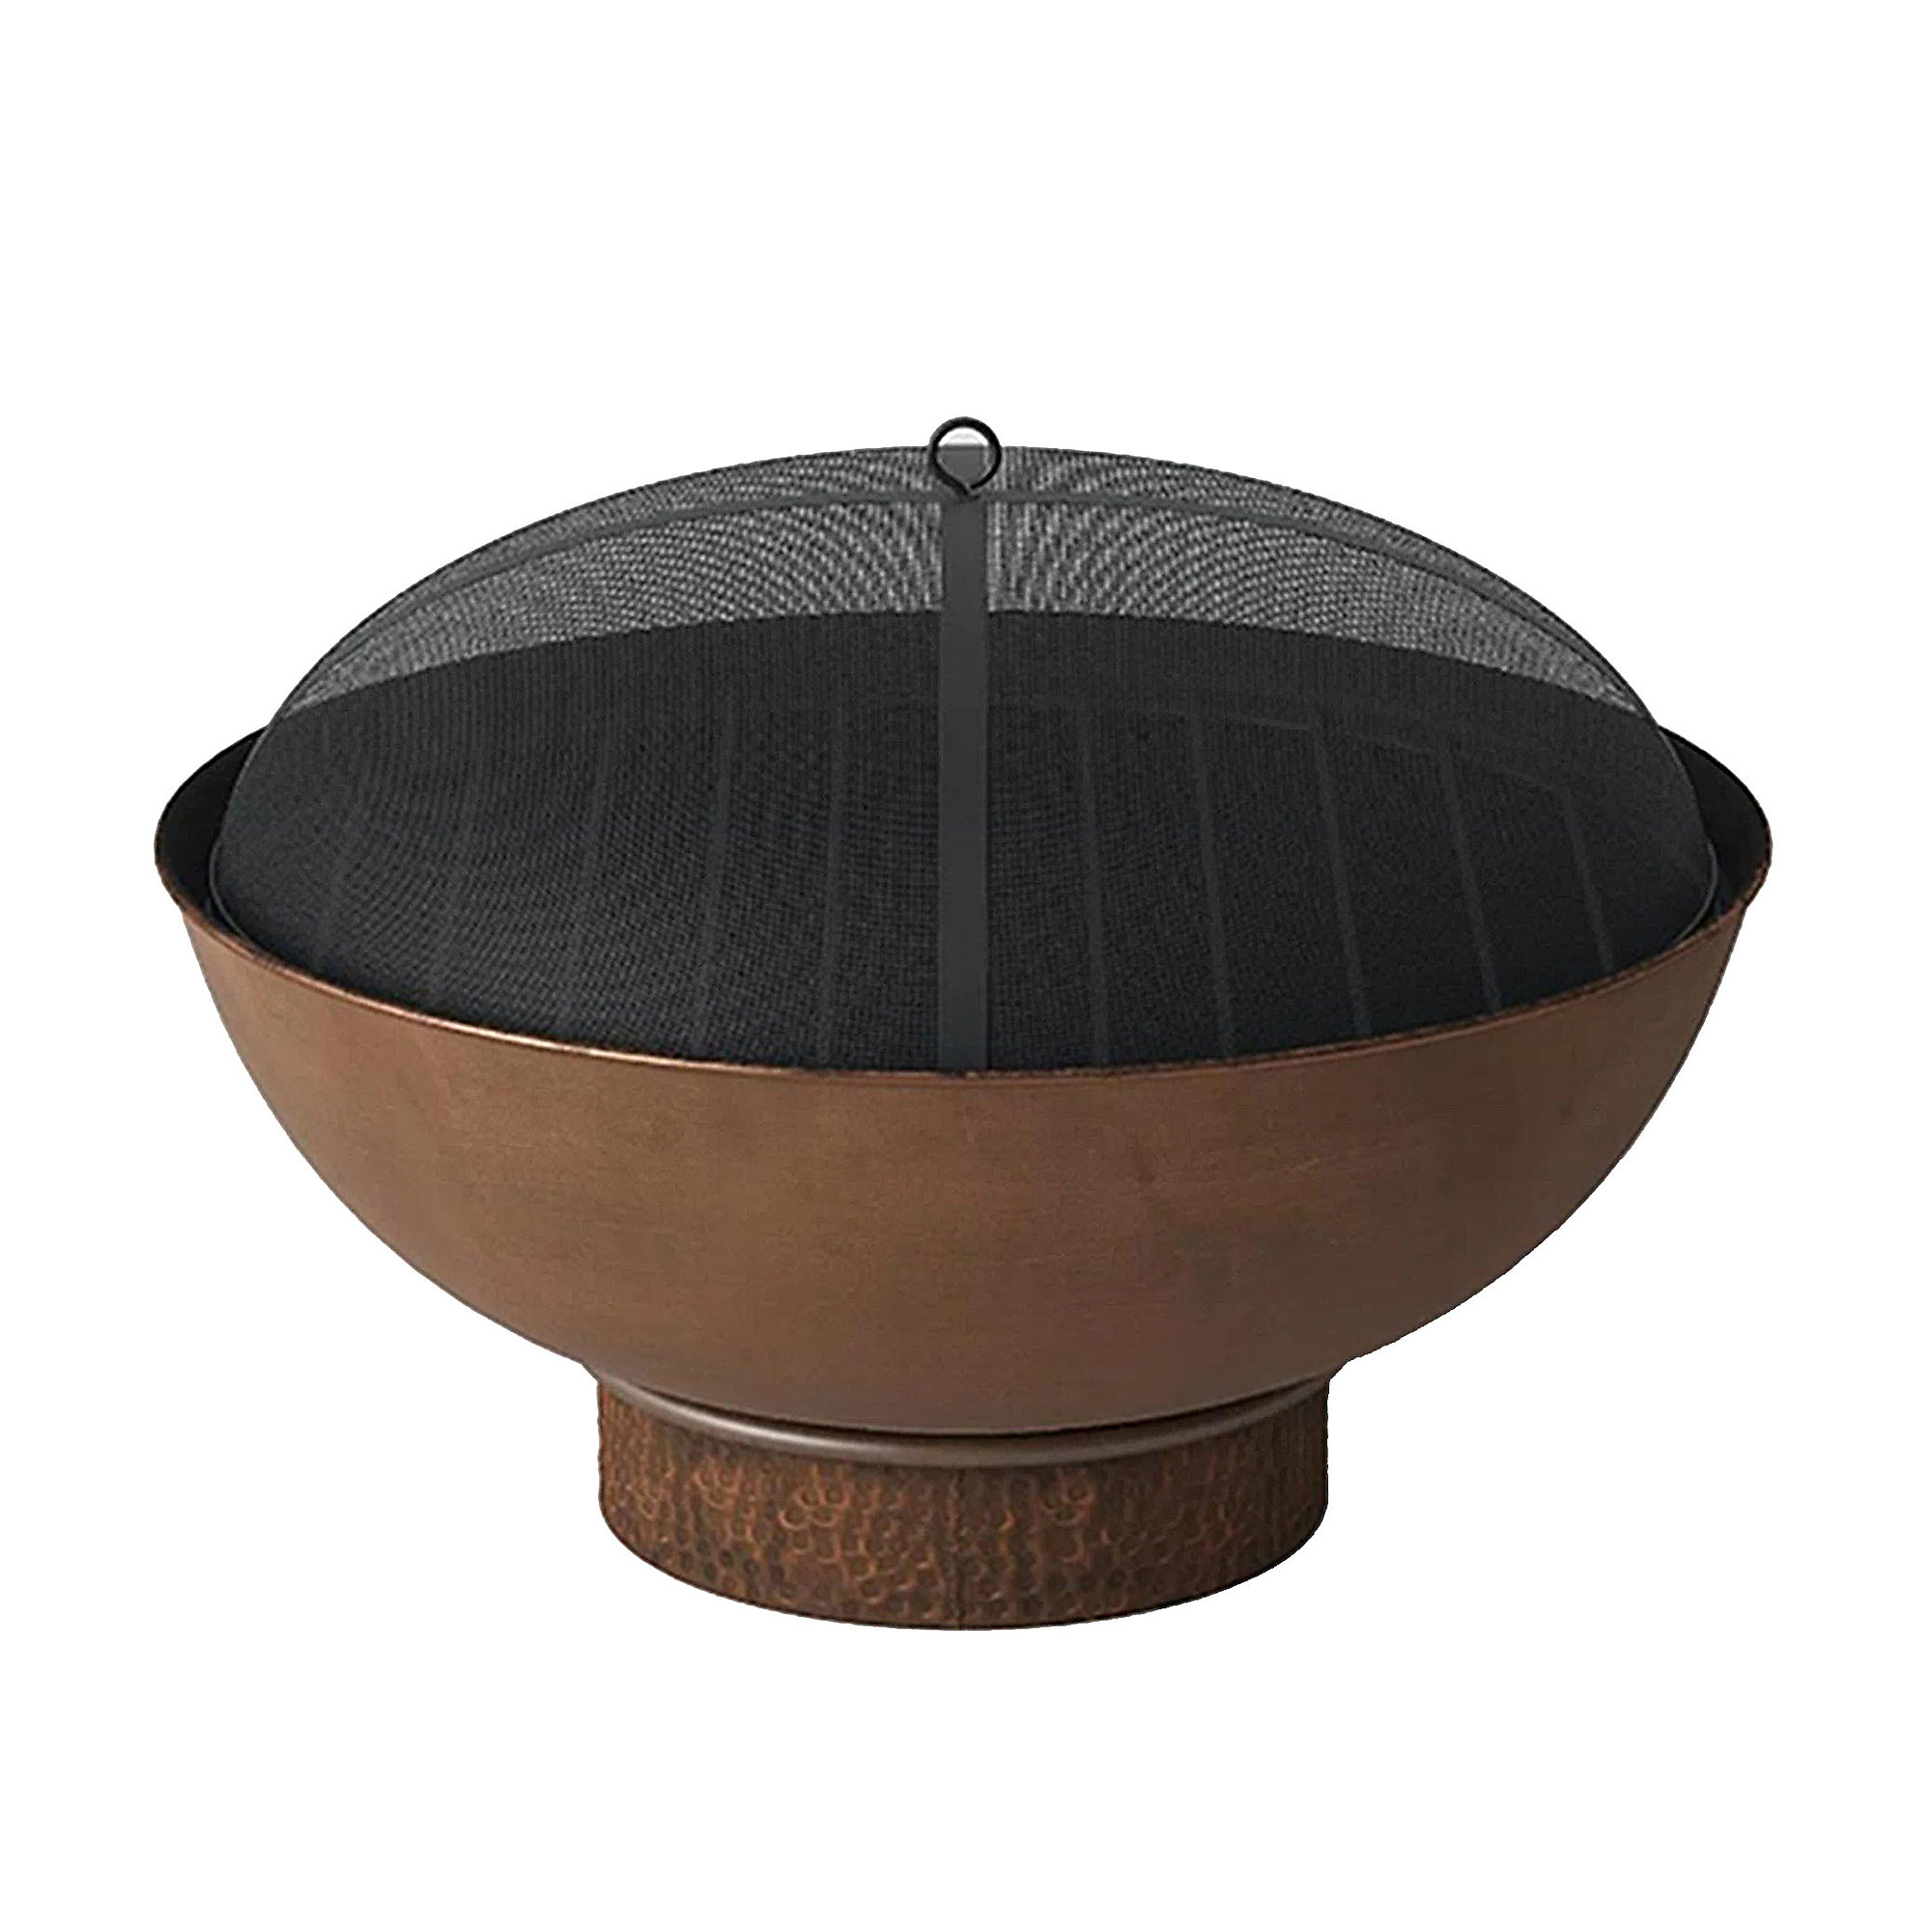 Bond, Tazon 30Inch Steel Wood Burning Fire Pit, Fuel Type Wood, Diameter 30 in, Material Combination, Model 51578